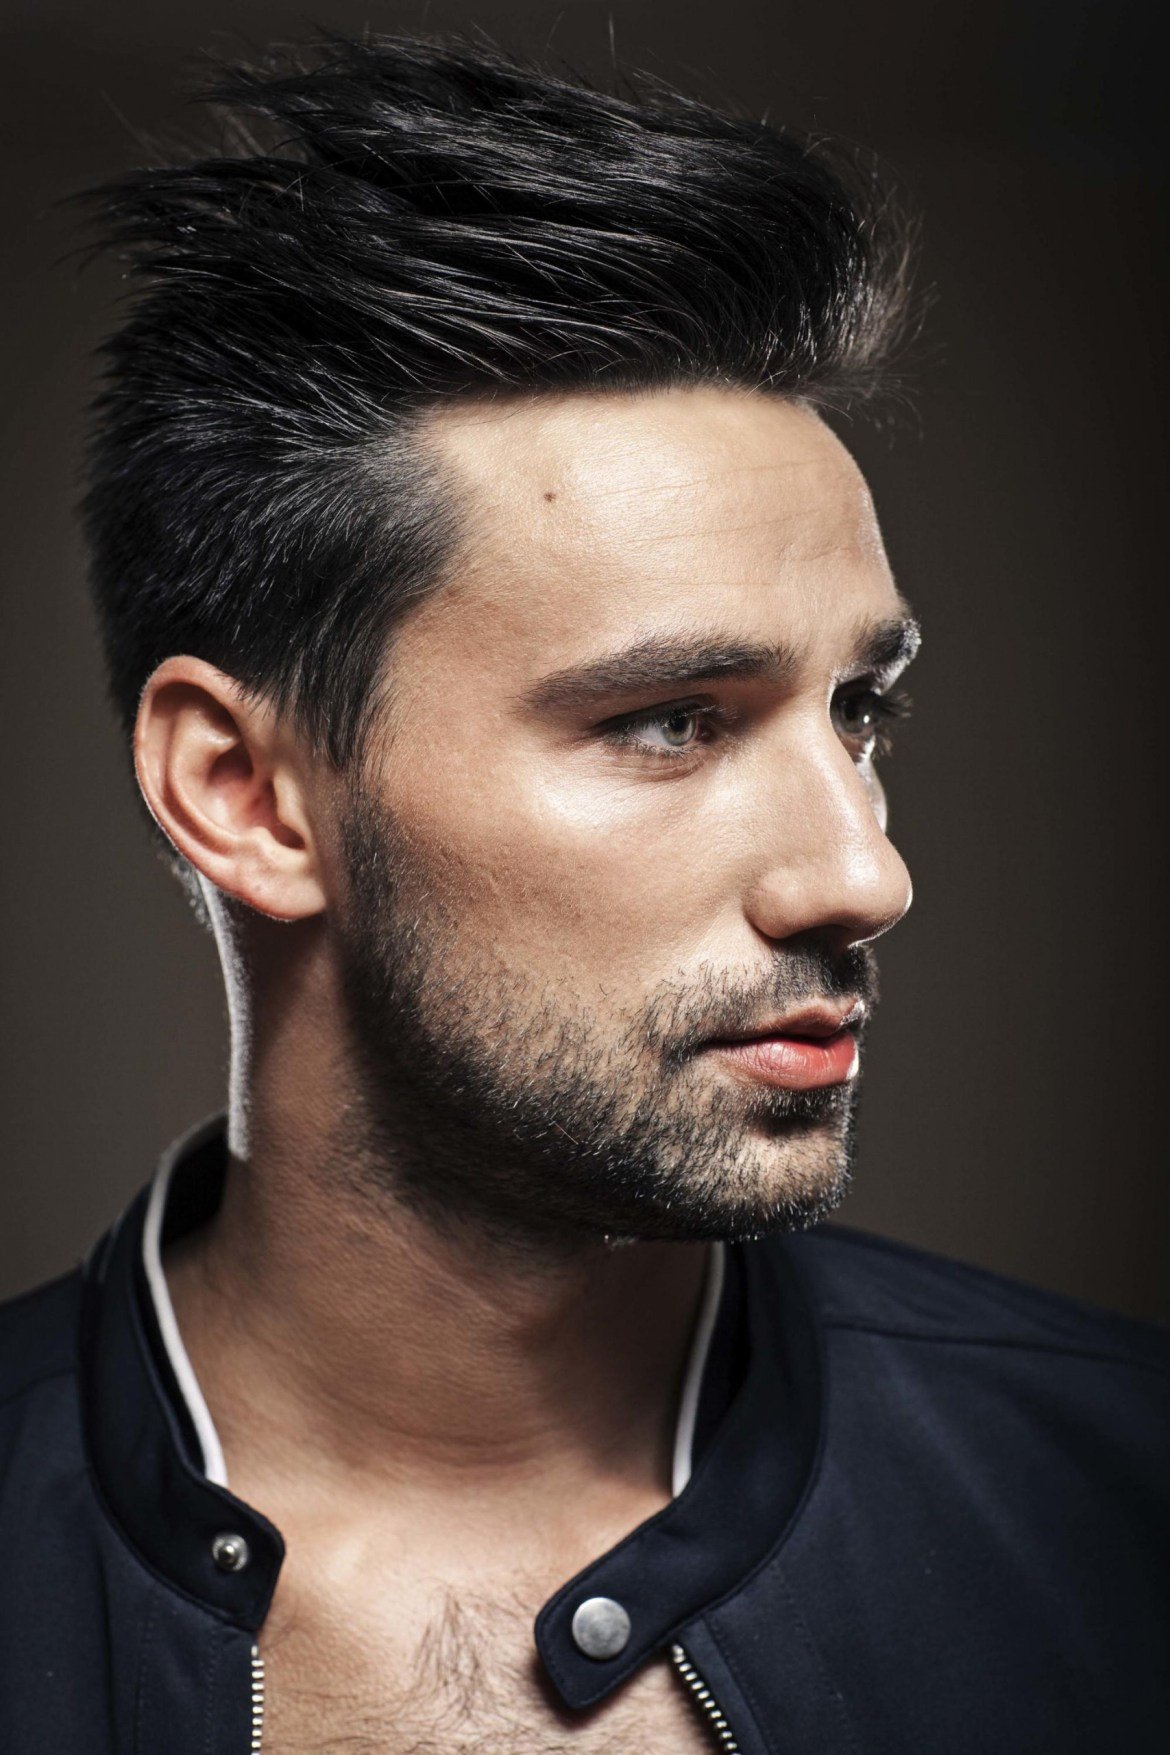 The Quiff And Comb Over Style Mix